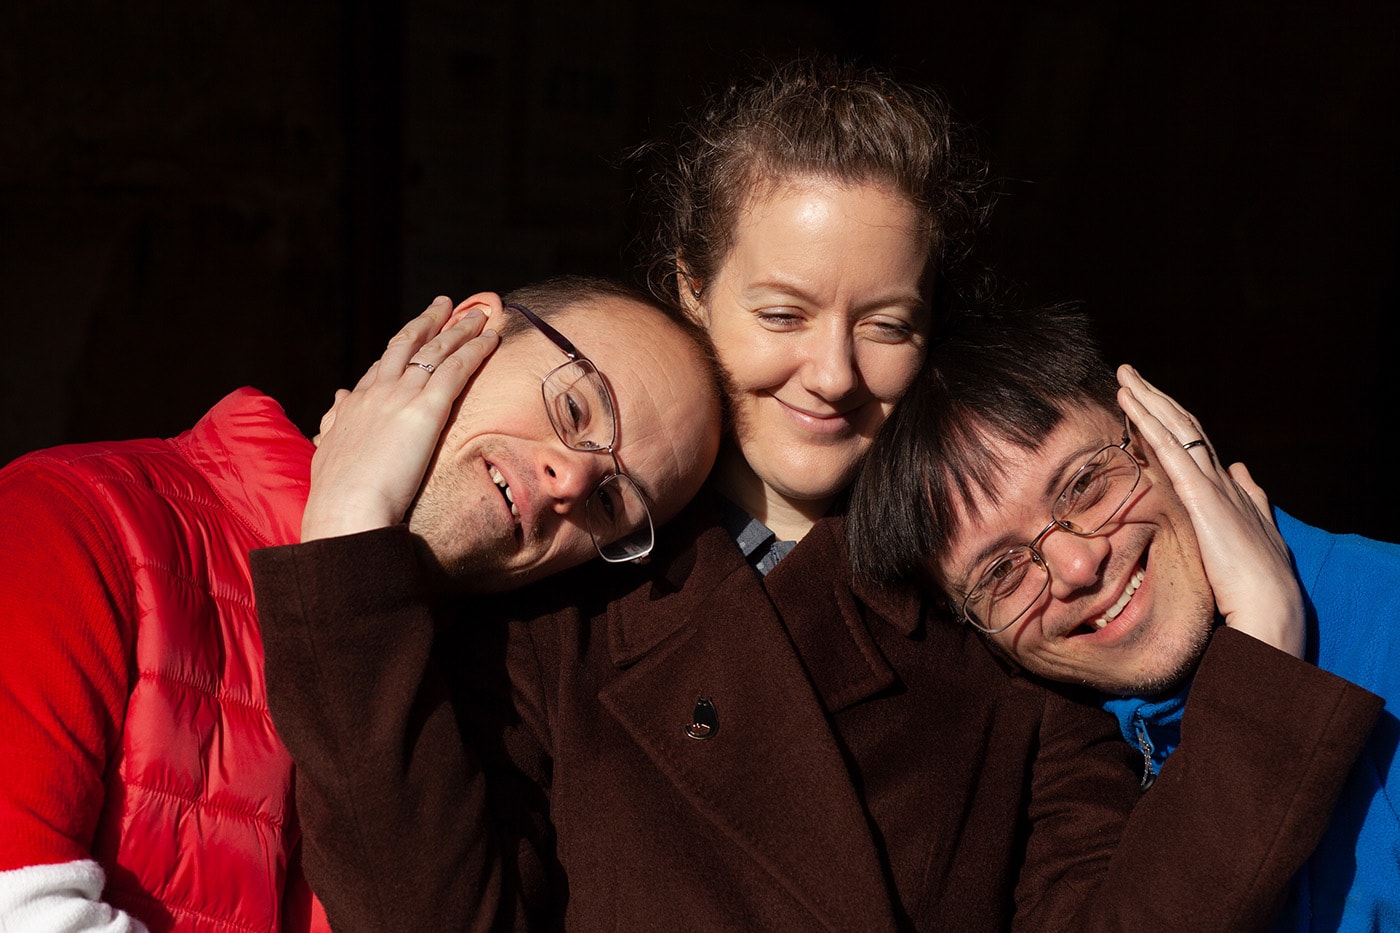 Three adoptive siblings, two with down syndrome share an affectionate happy moment. The sister in the middle puts her arms lovingly around her brother's faces.